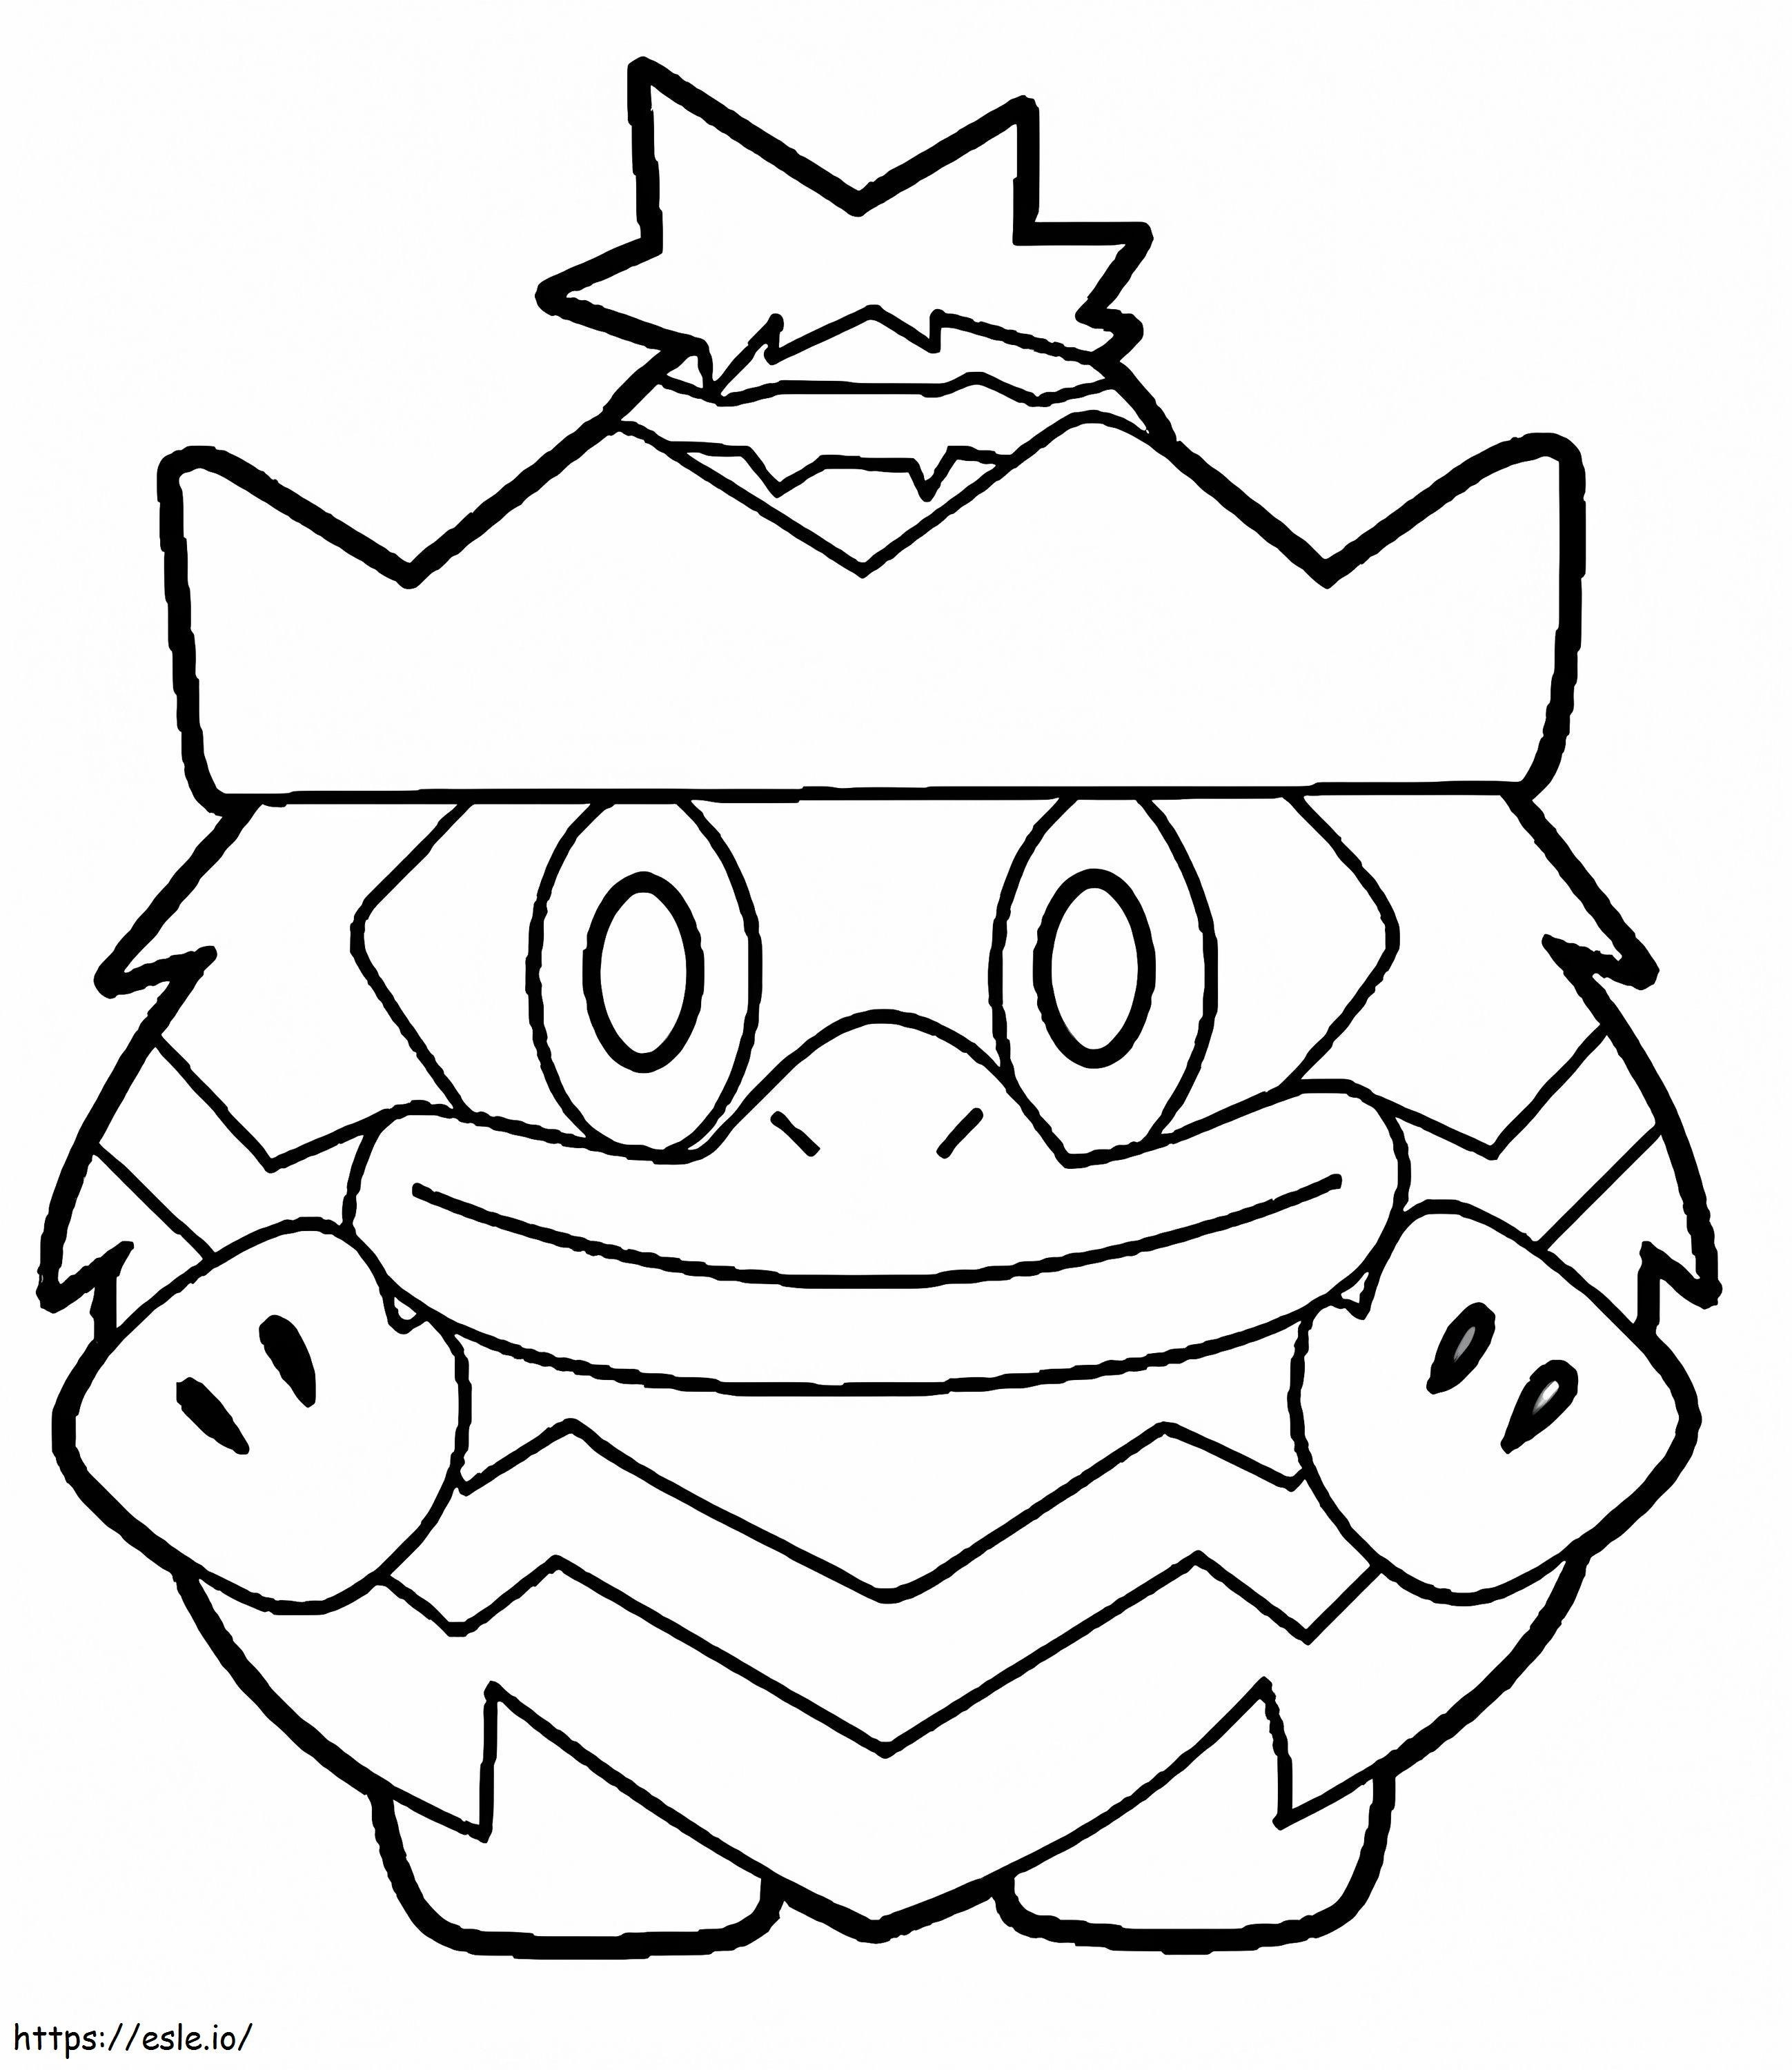 Ludicrous 5 coloring page